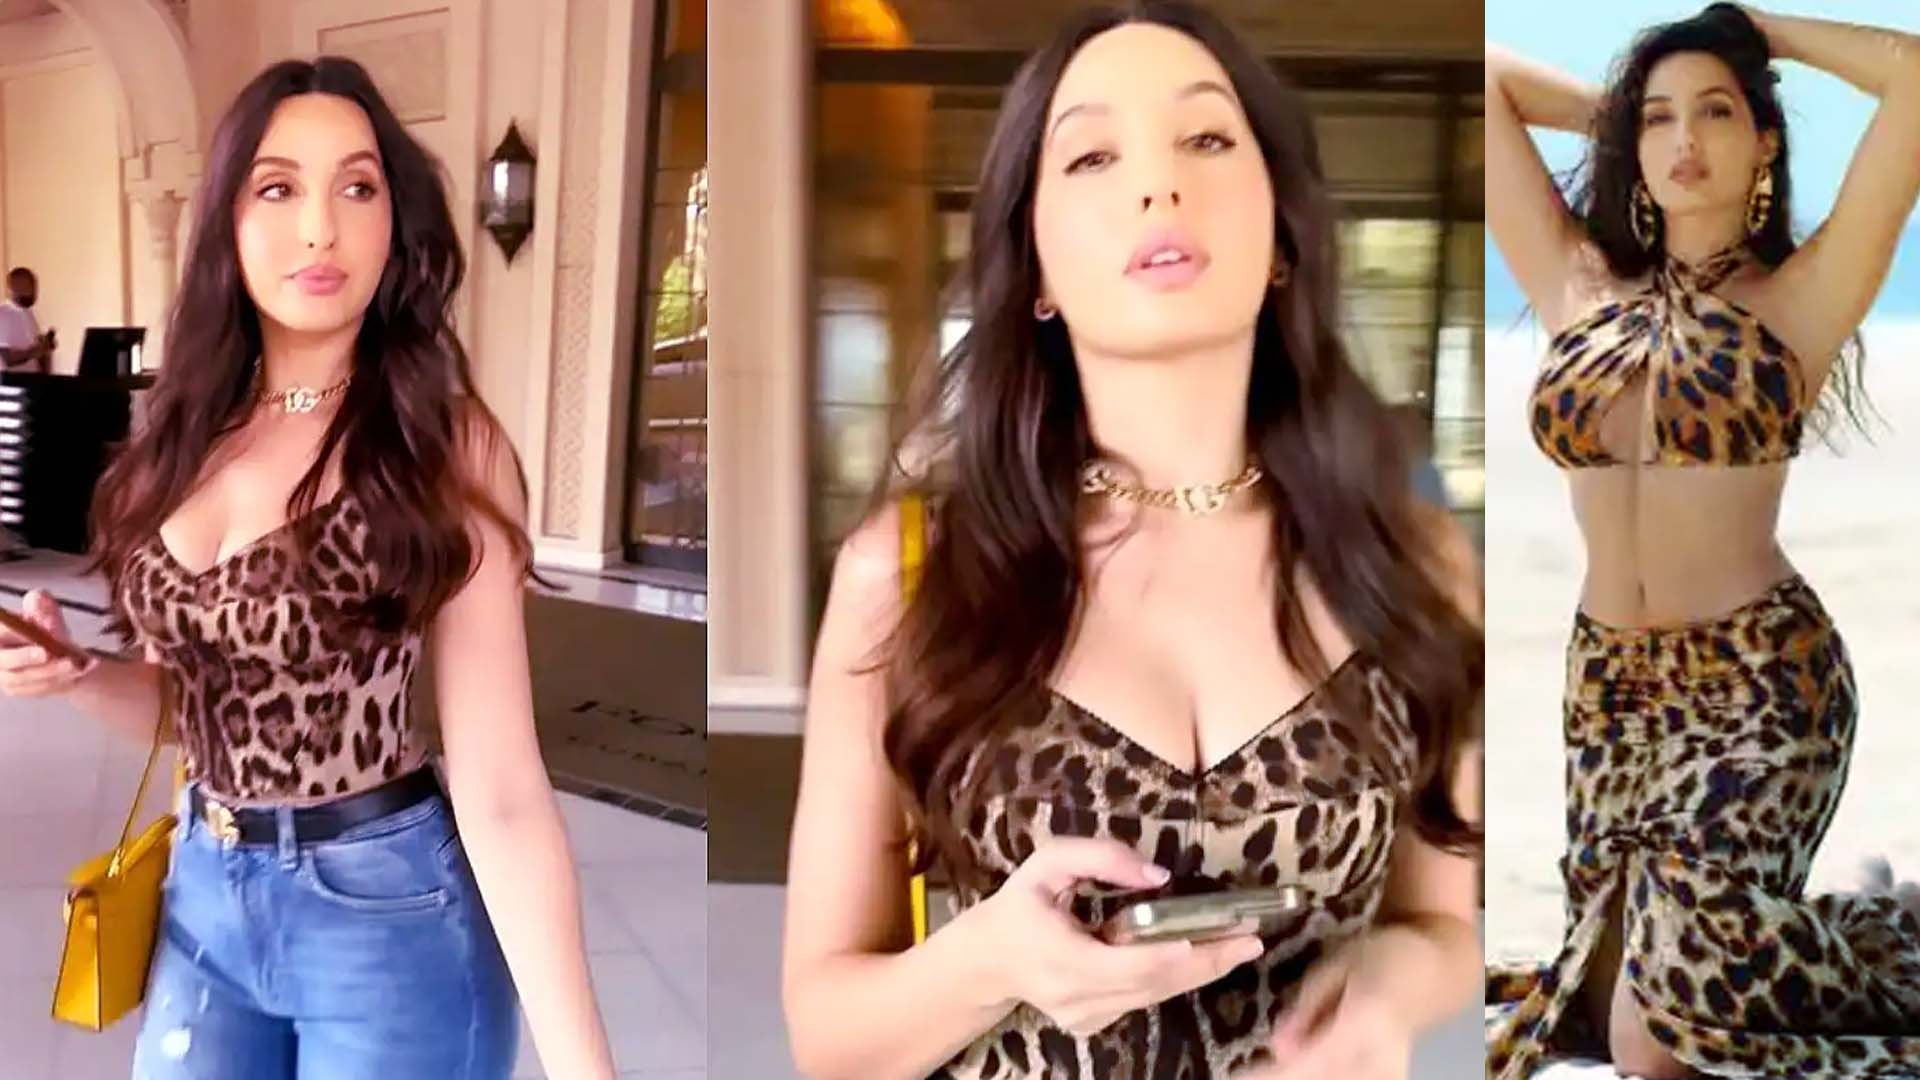 Nora Fatehi Flaunts Her Incredible Figure In A Hot Bustier Top And